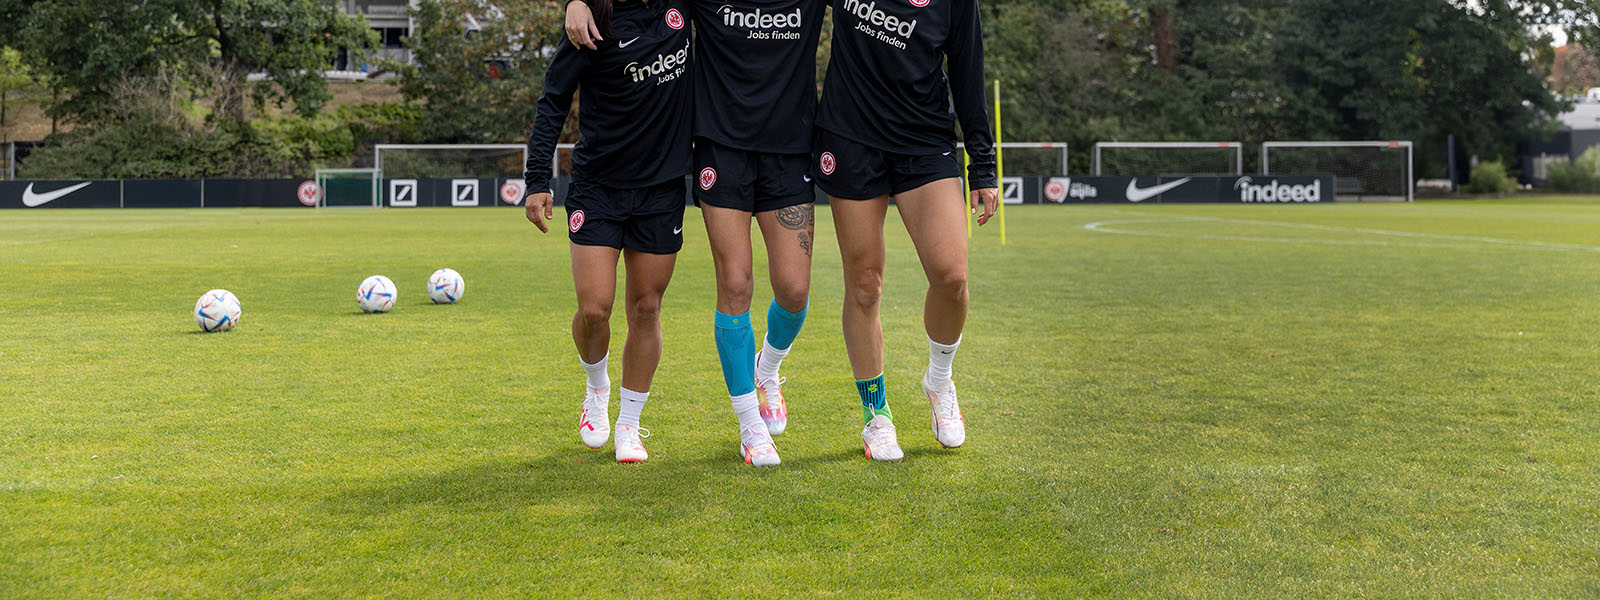 Three soccer players with different bandages hug themselves to a lawn